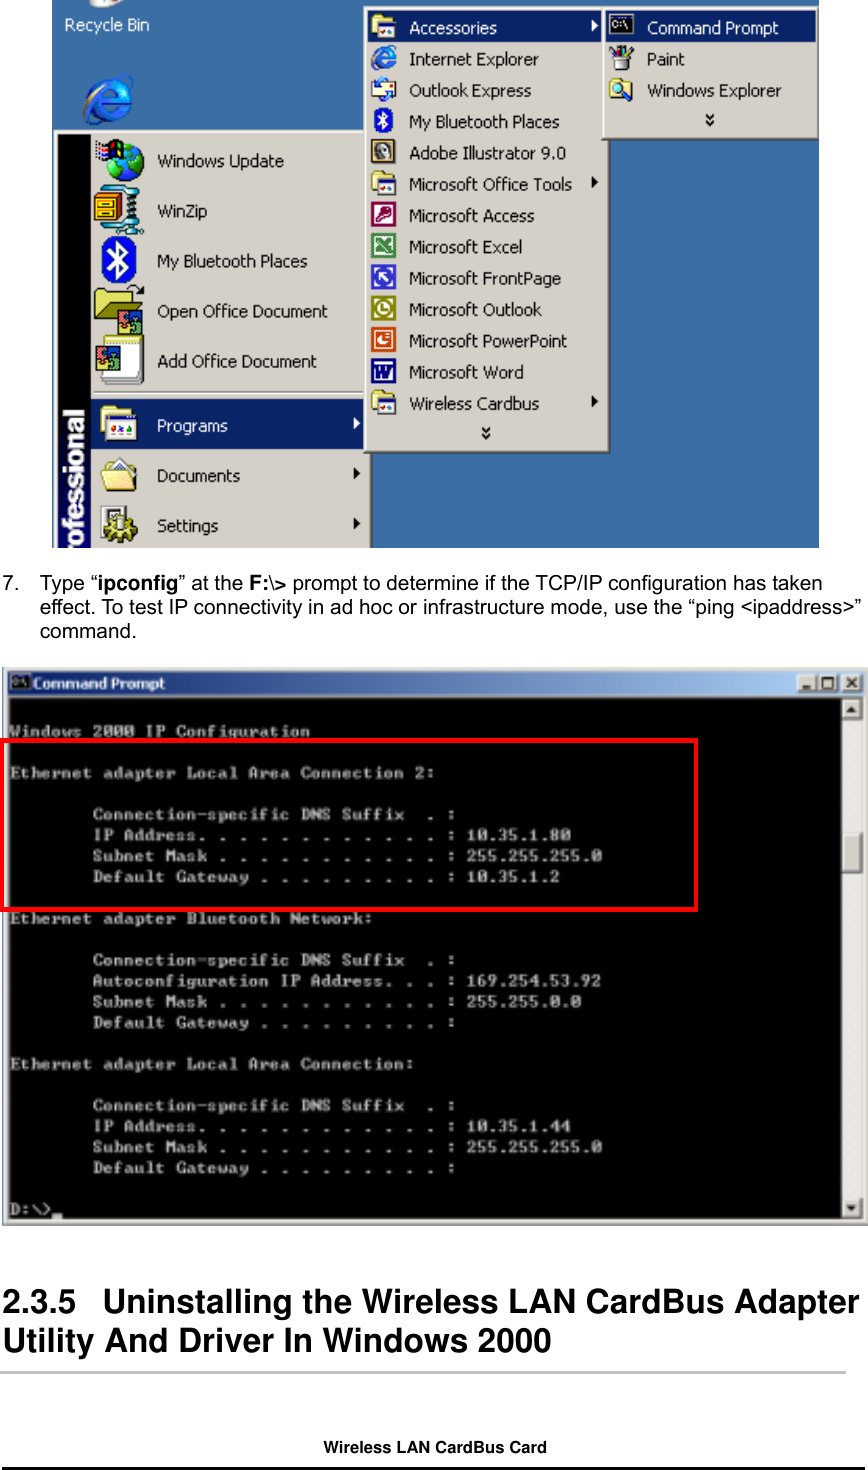   7. Type “ipconfig” at the F:\&gt; prompt to determine if the TCP/IP configuration has taken effect. To test IP connectivity in ad hoc or infrastructure mode, use the “ping &lt;ipaddress&gt;” command.     2.3.5  Uninstalling the Wireless LAN CardBus Adapter Utility And Driver In Windows 2000   Wireless LAN CardBus Card 